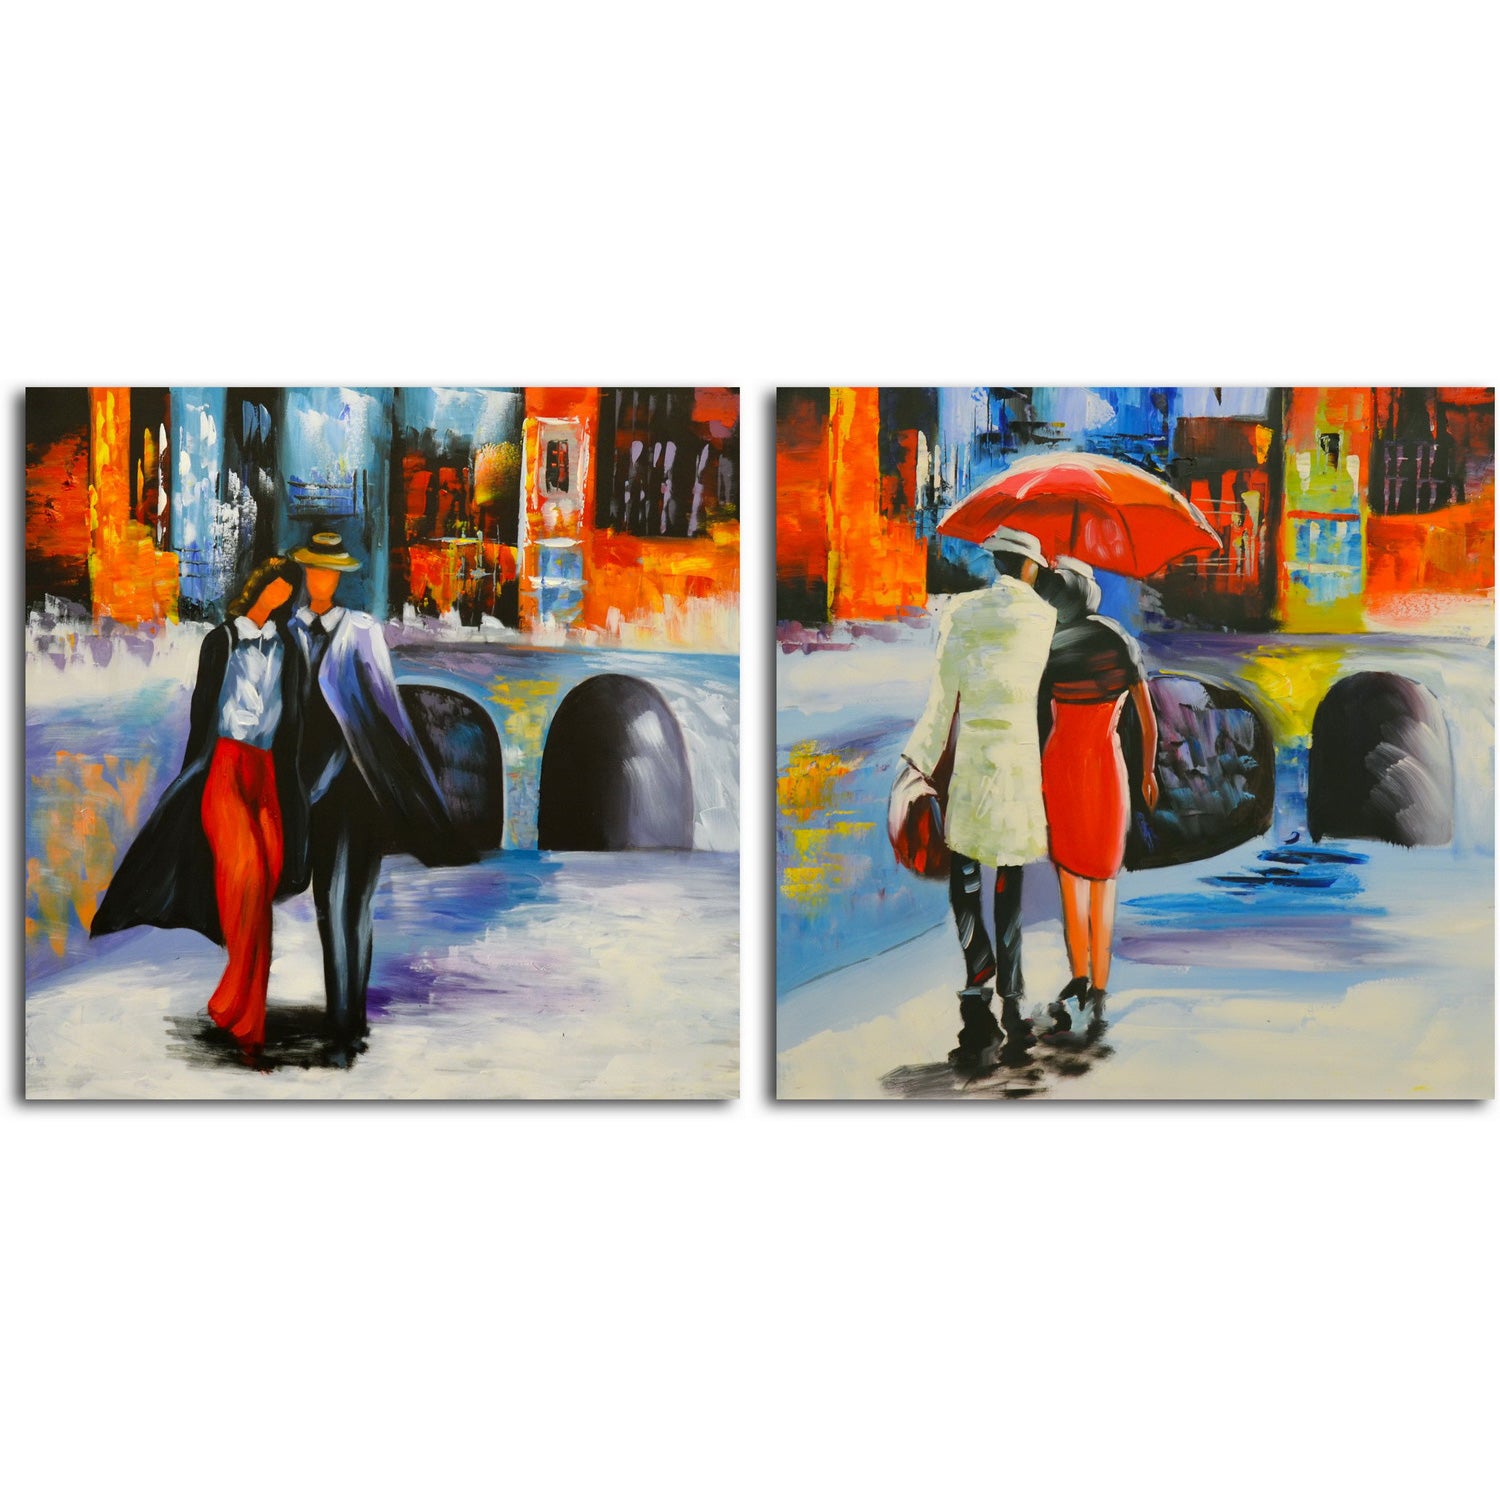 "Coming and Going" Original painting on canvas - Set of 2